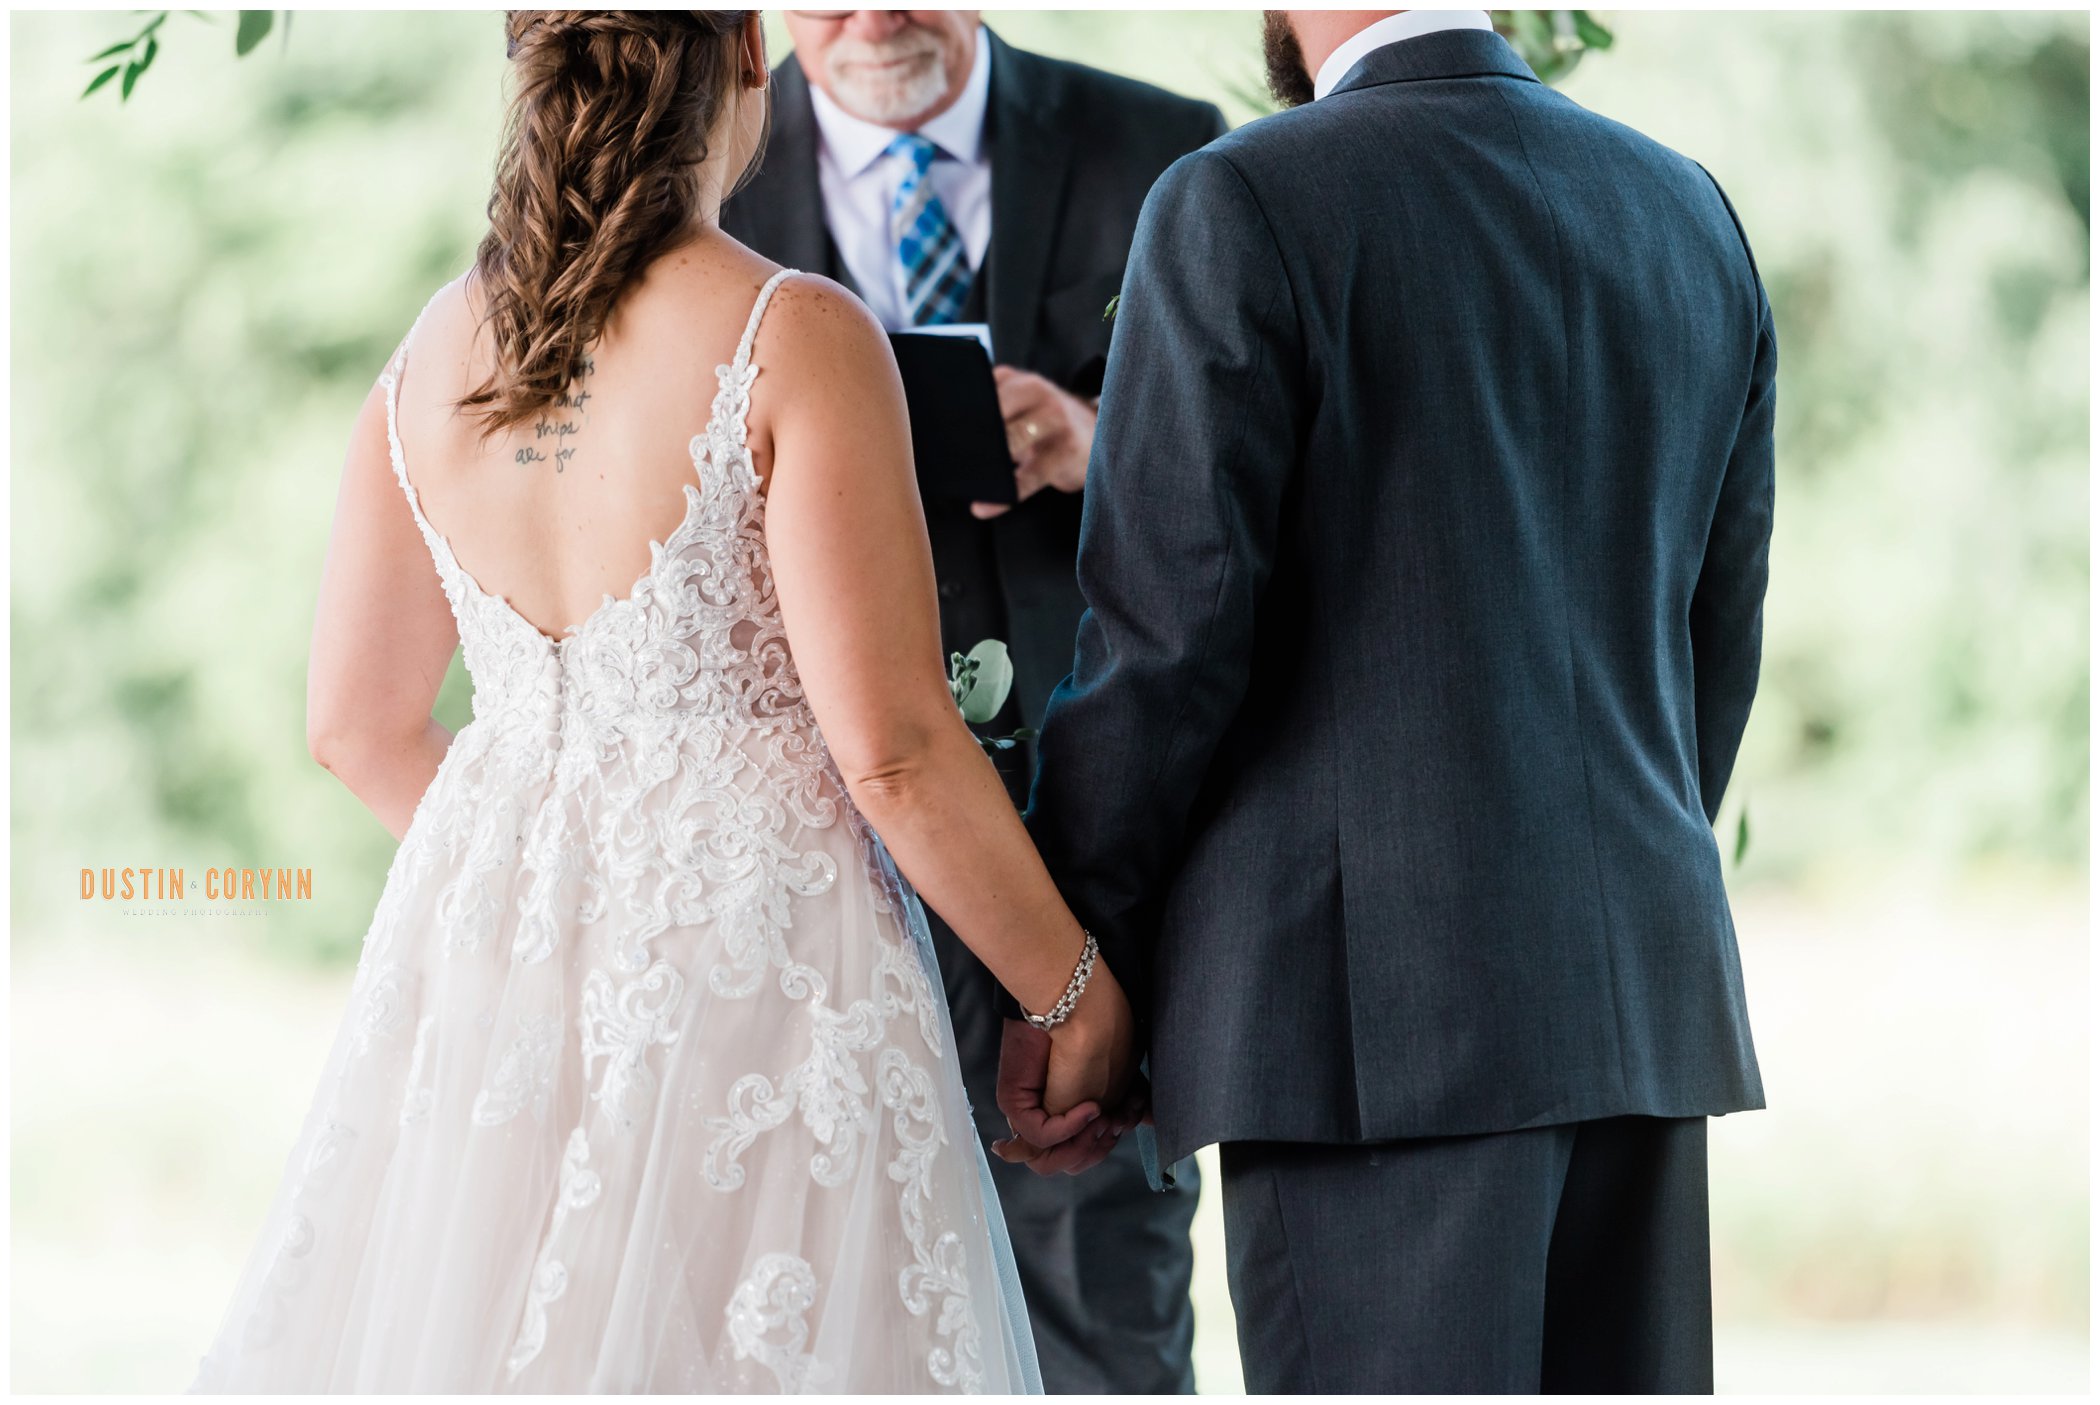 Holding Hands during Ceremony